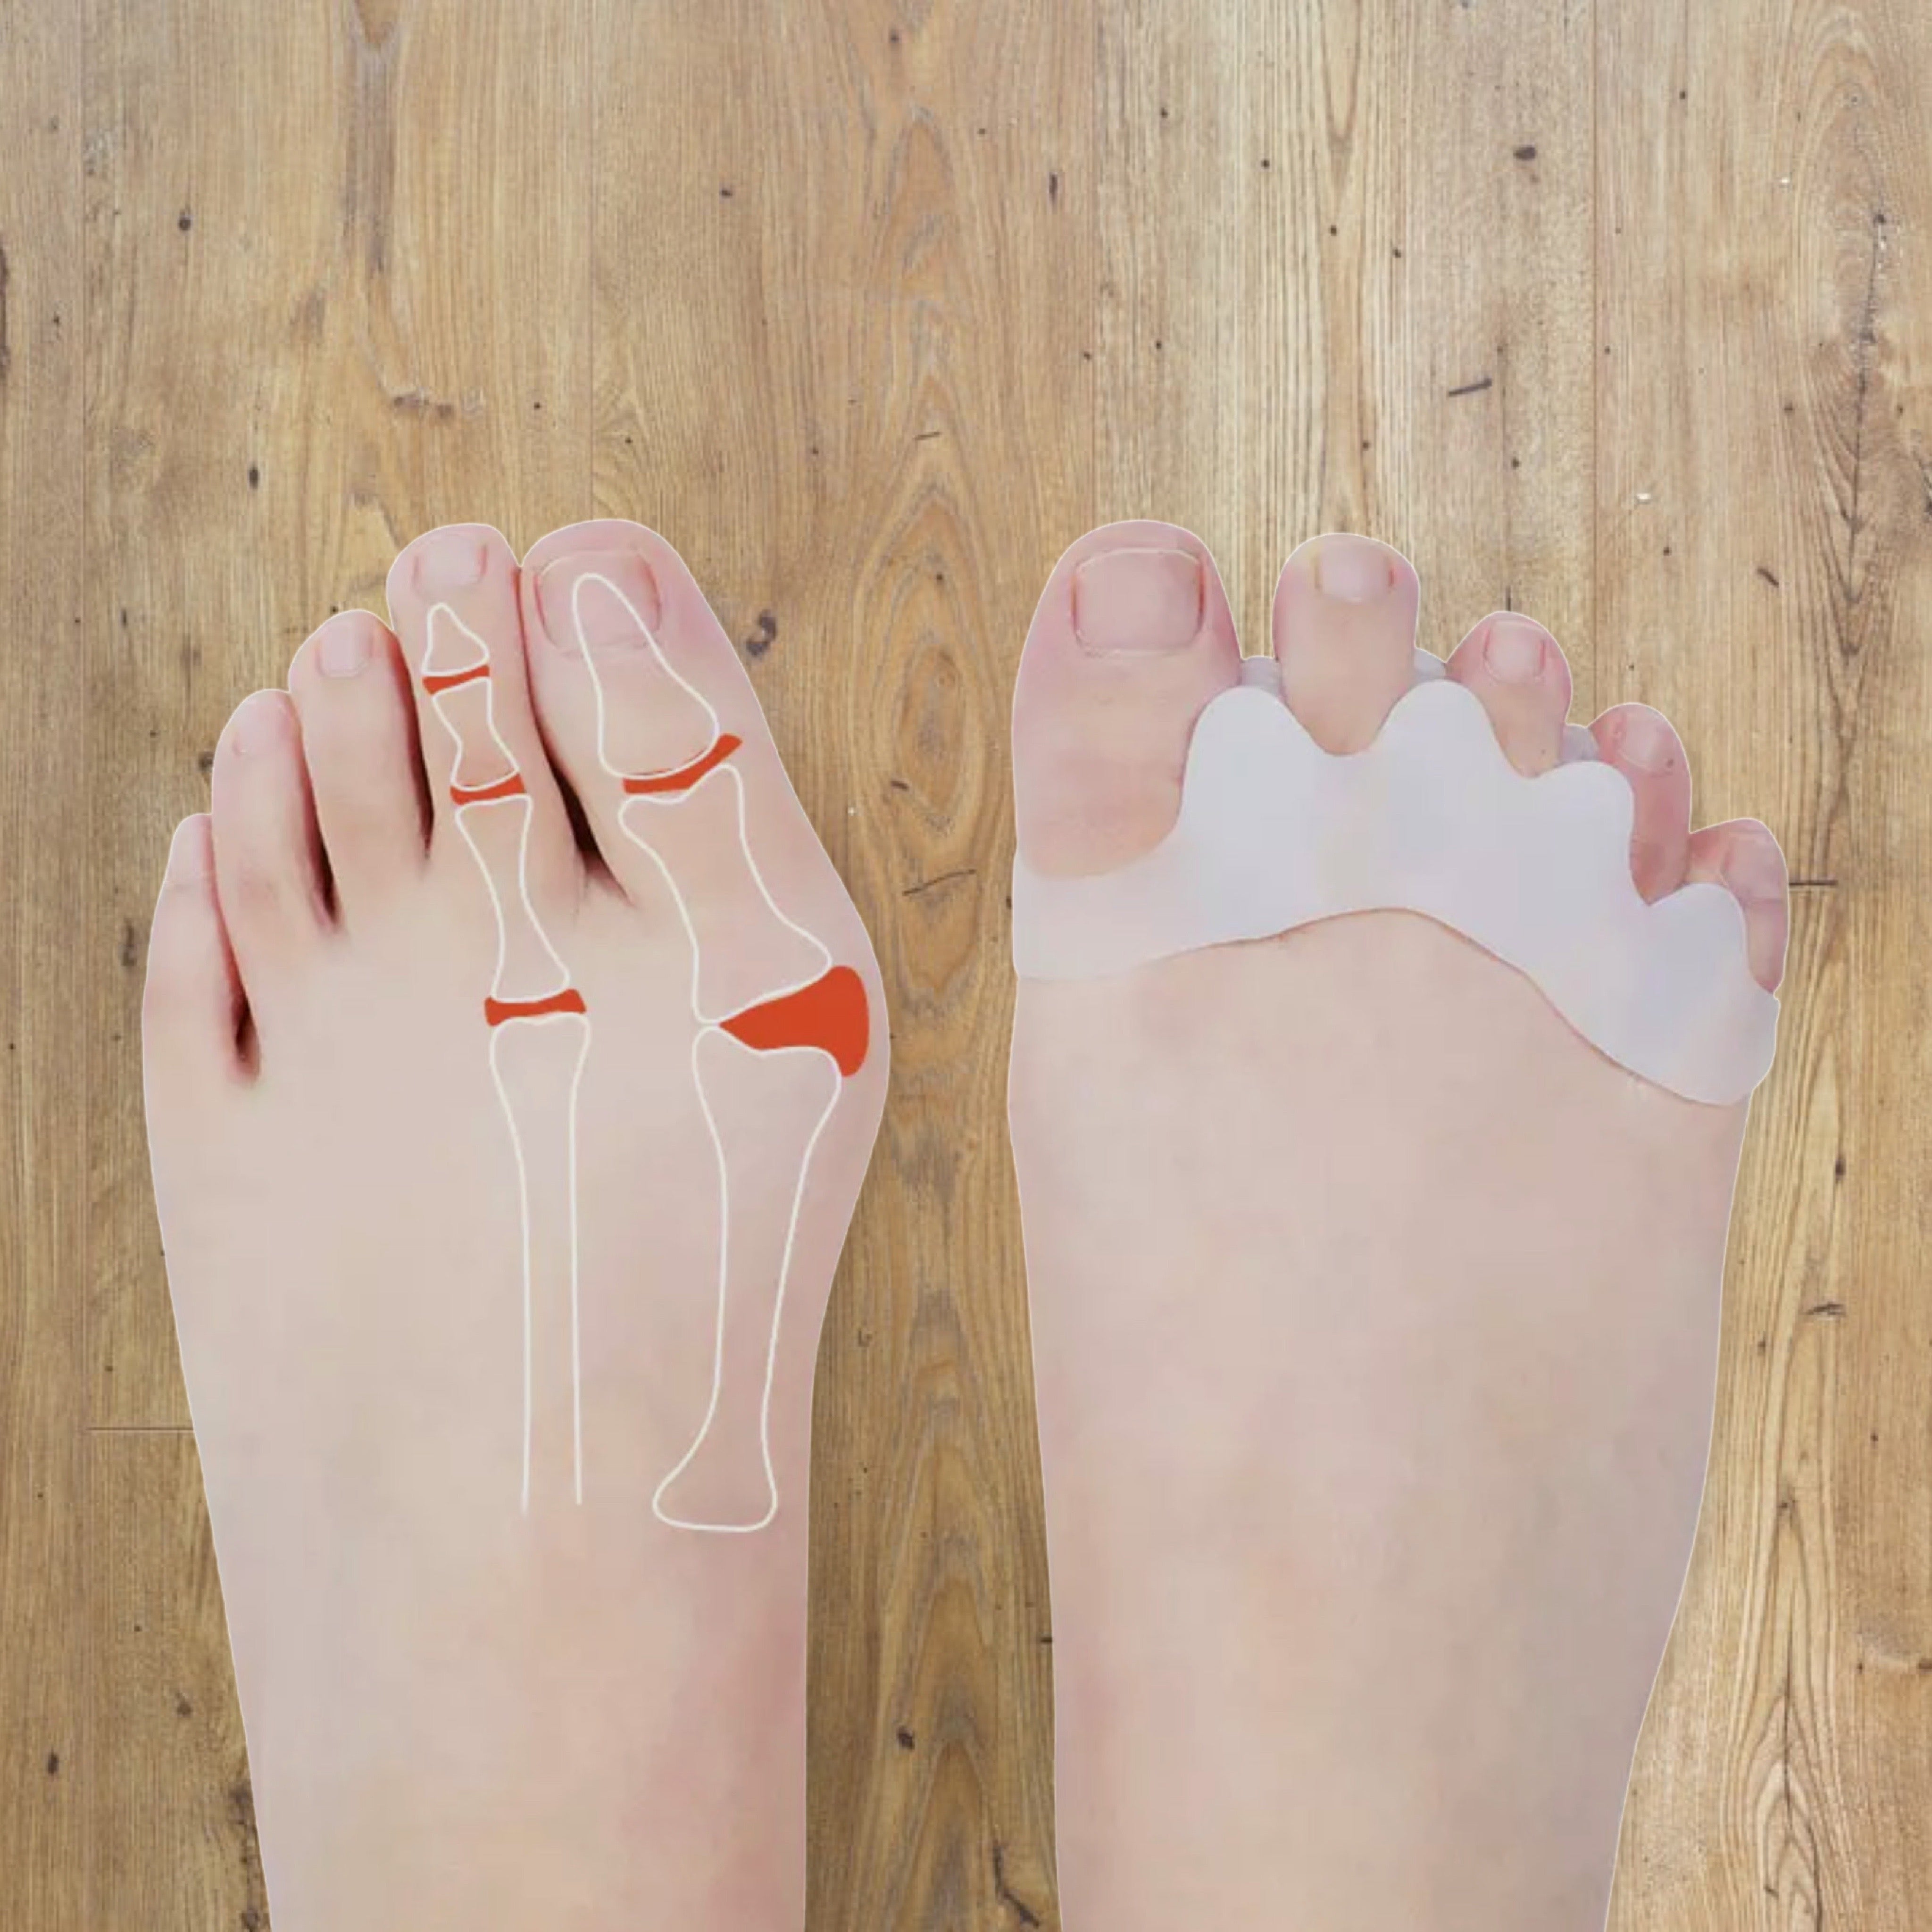 Toe spacers with @wellbybelle #foot #feet #shoes #barefoot #health #le, barefoot shoes